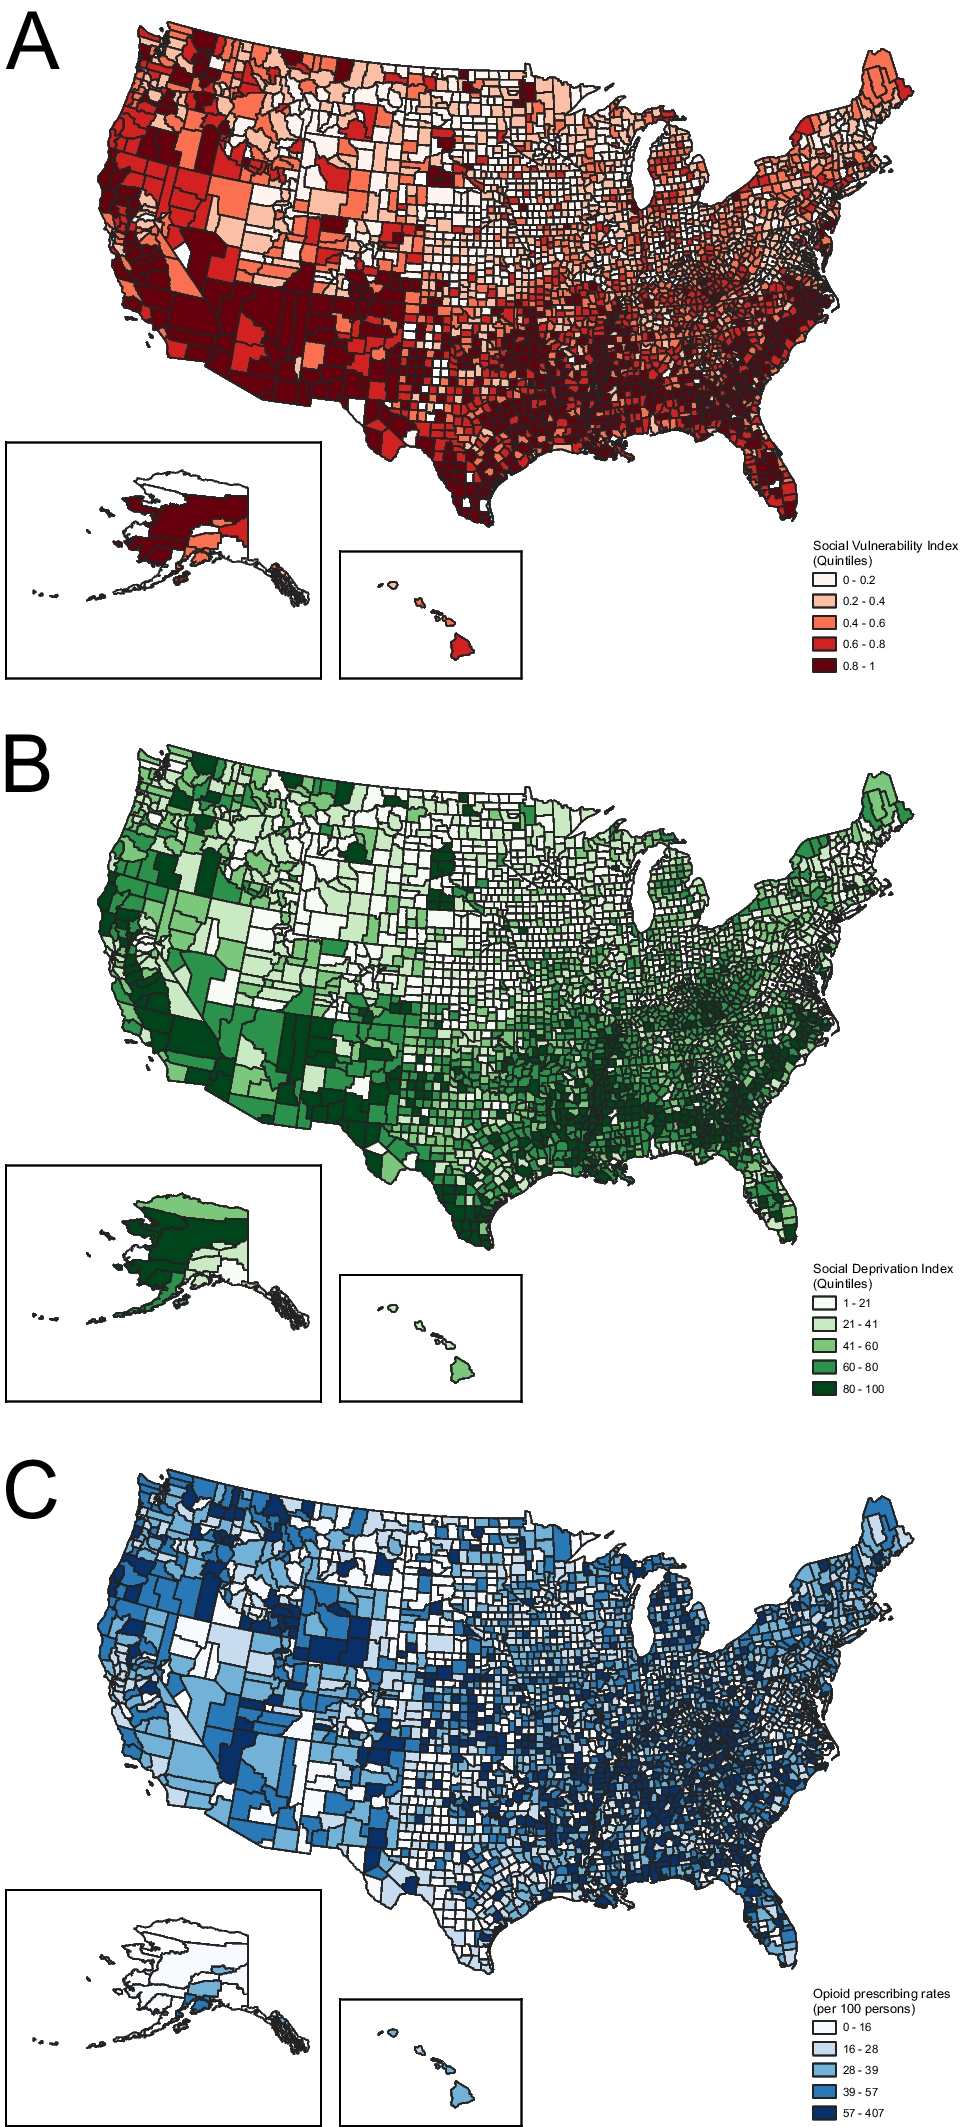 Association Between County-Level Social Vulnerability and Deprivation with Opioid Dispensing Rates in the United States